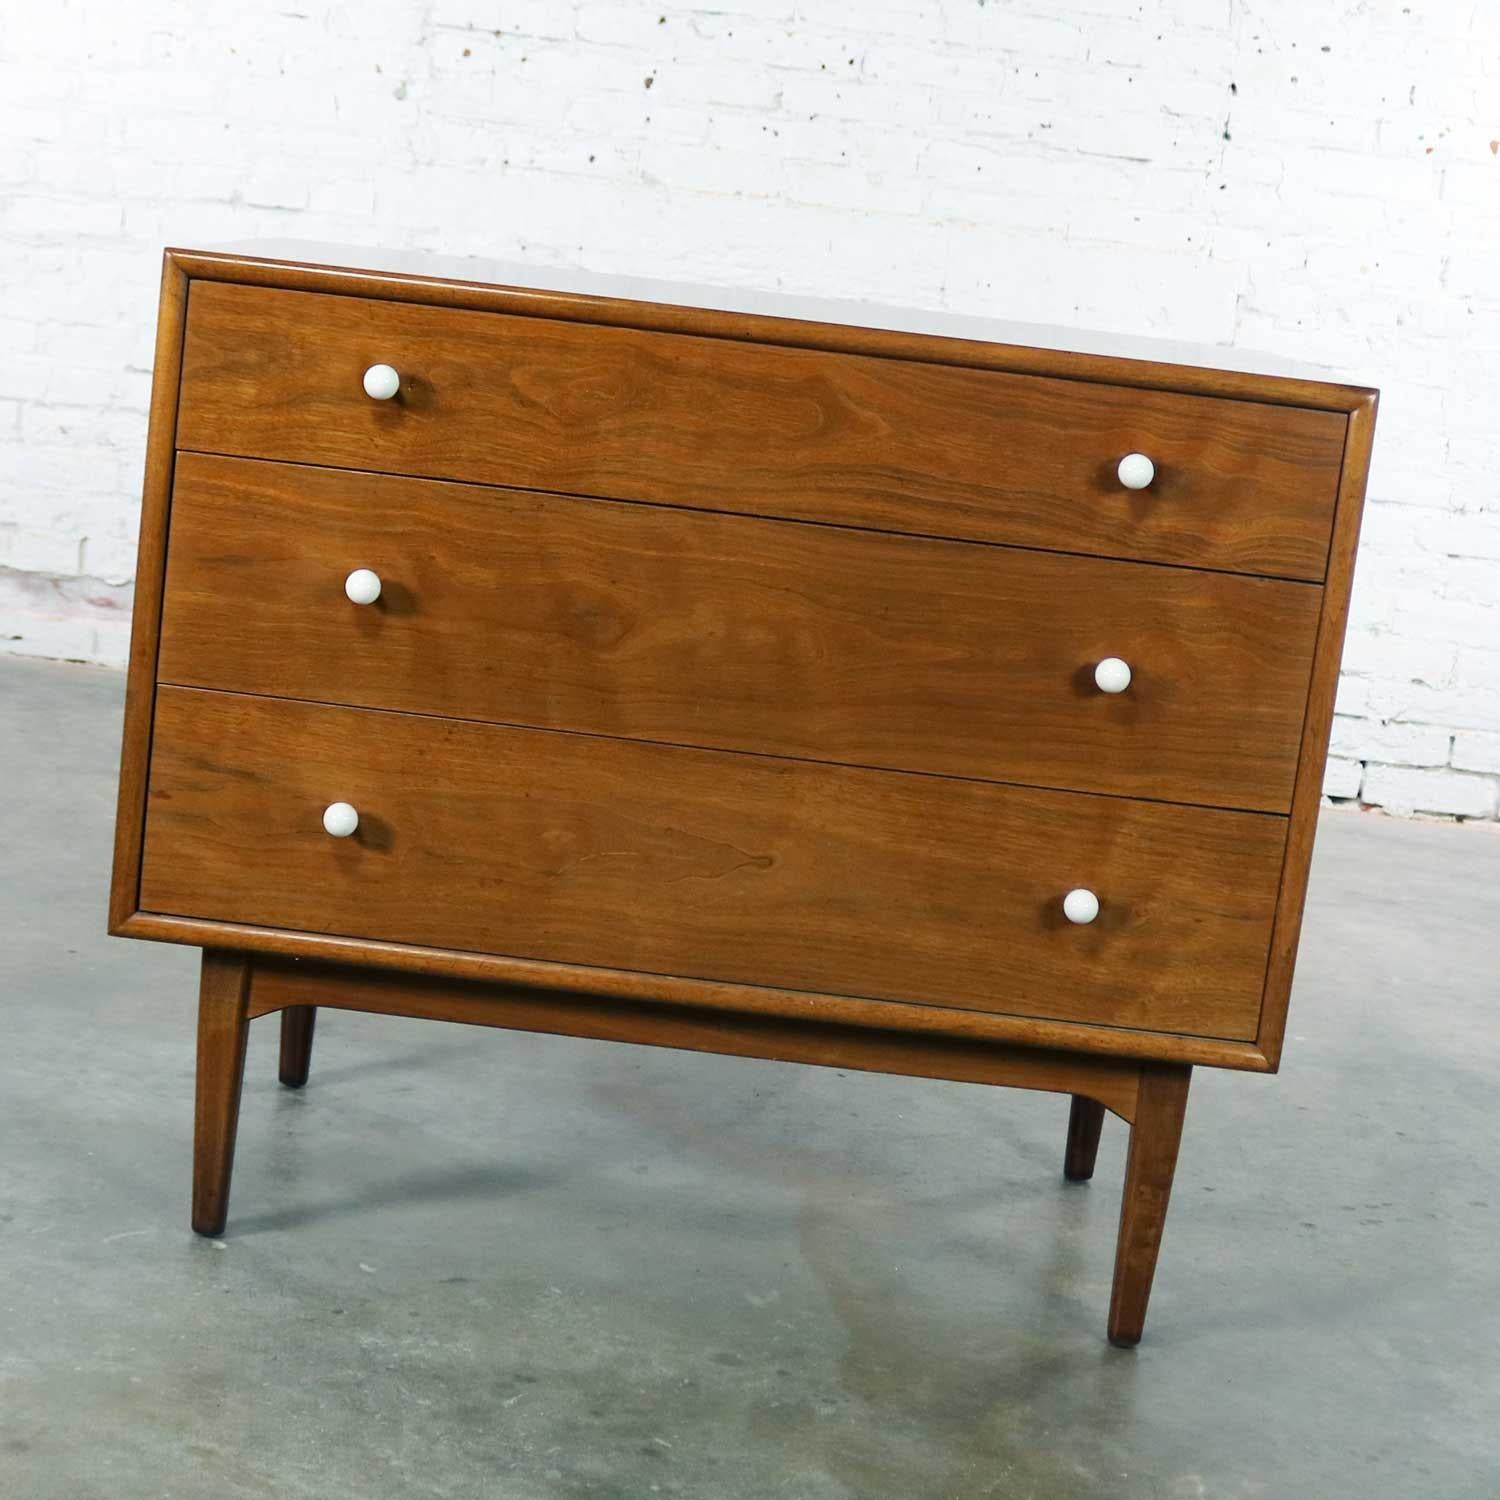 Handsome Mid-Century Modern walnut three-drawer bachelor chest 440-2 by Drexel from their Declaration collection designed by Kipp Stewart and Stewart MacDougall. It is in fabulous vintage condition overall. There is normal patina for its age and